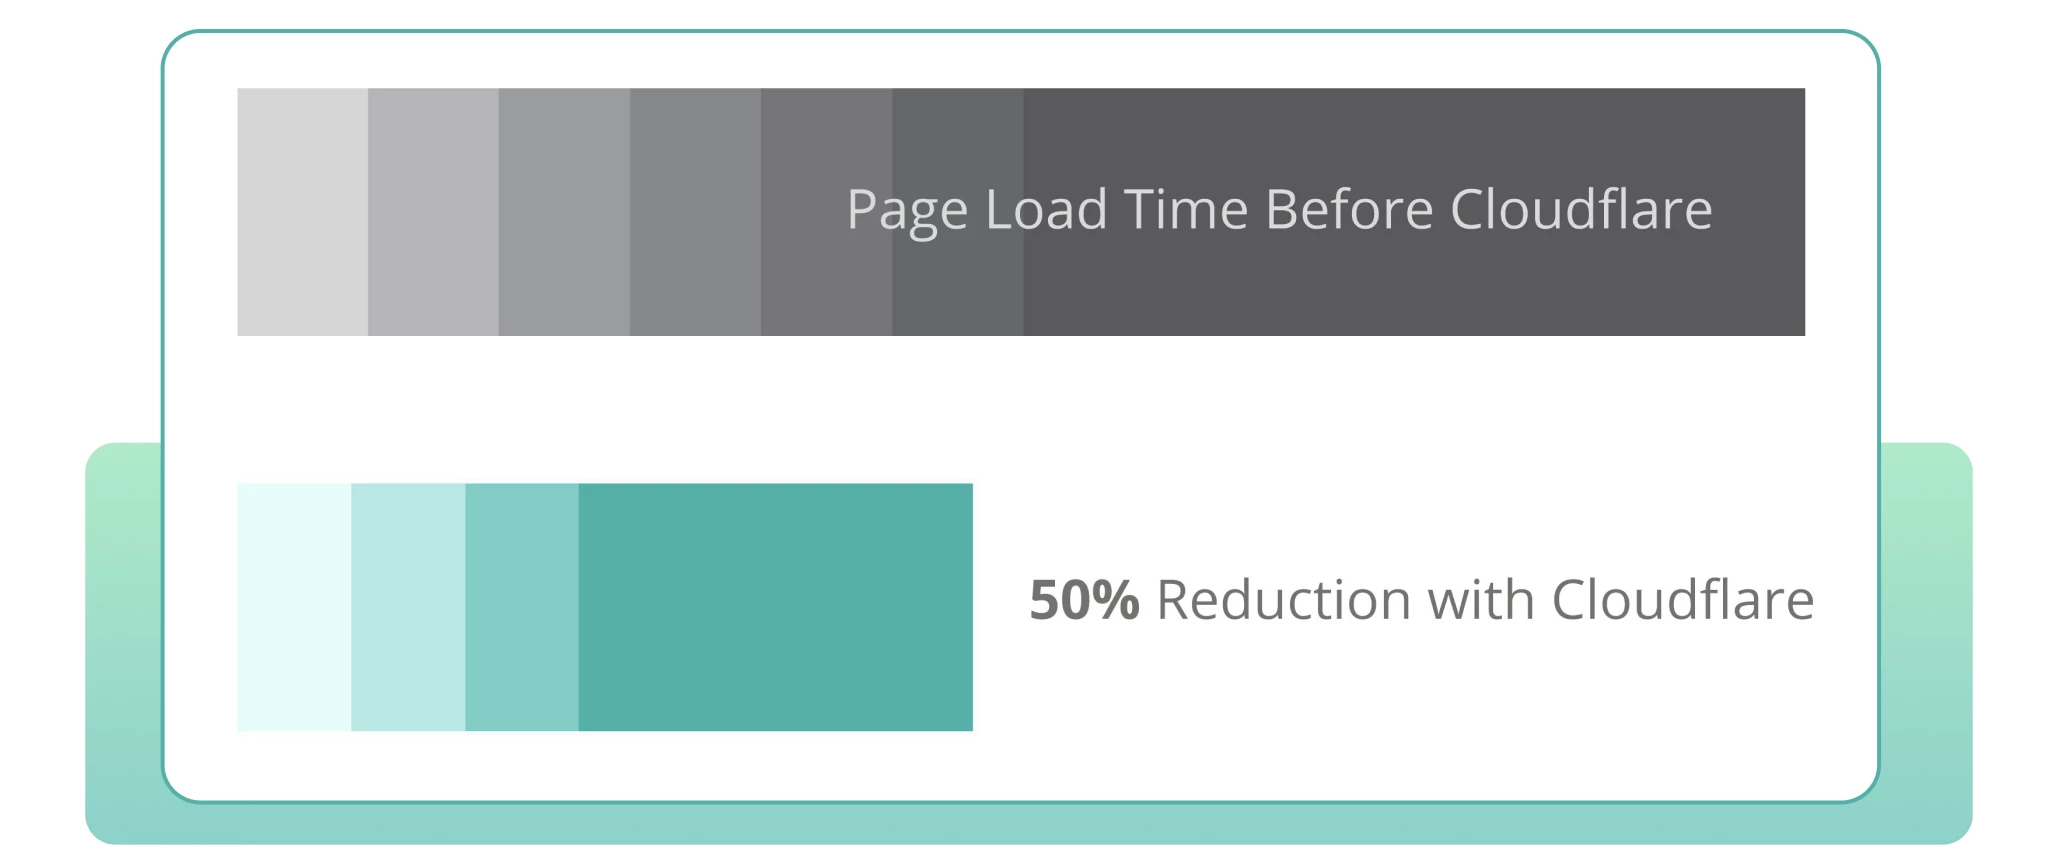 After implementing the technology, the company was able to reduce loading speed by 50% and increase user retention.